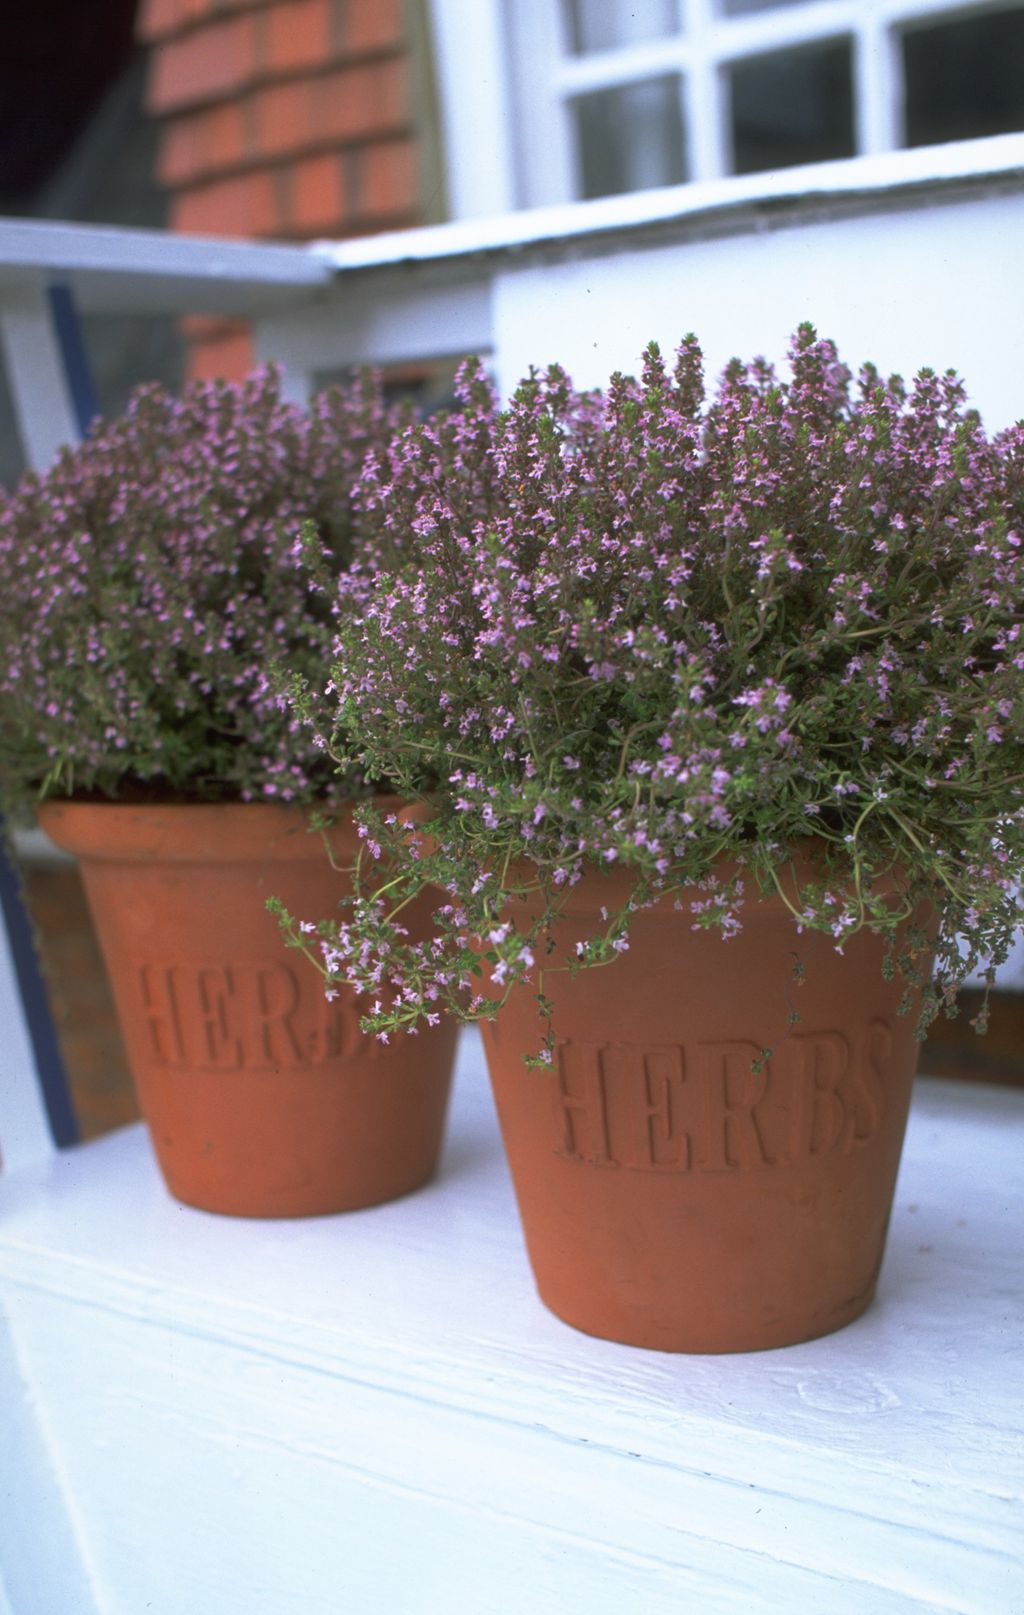 growing thyme in central texas